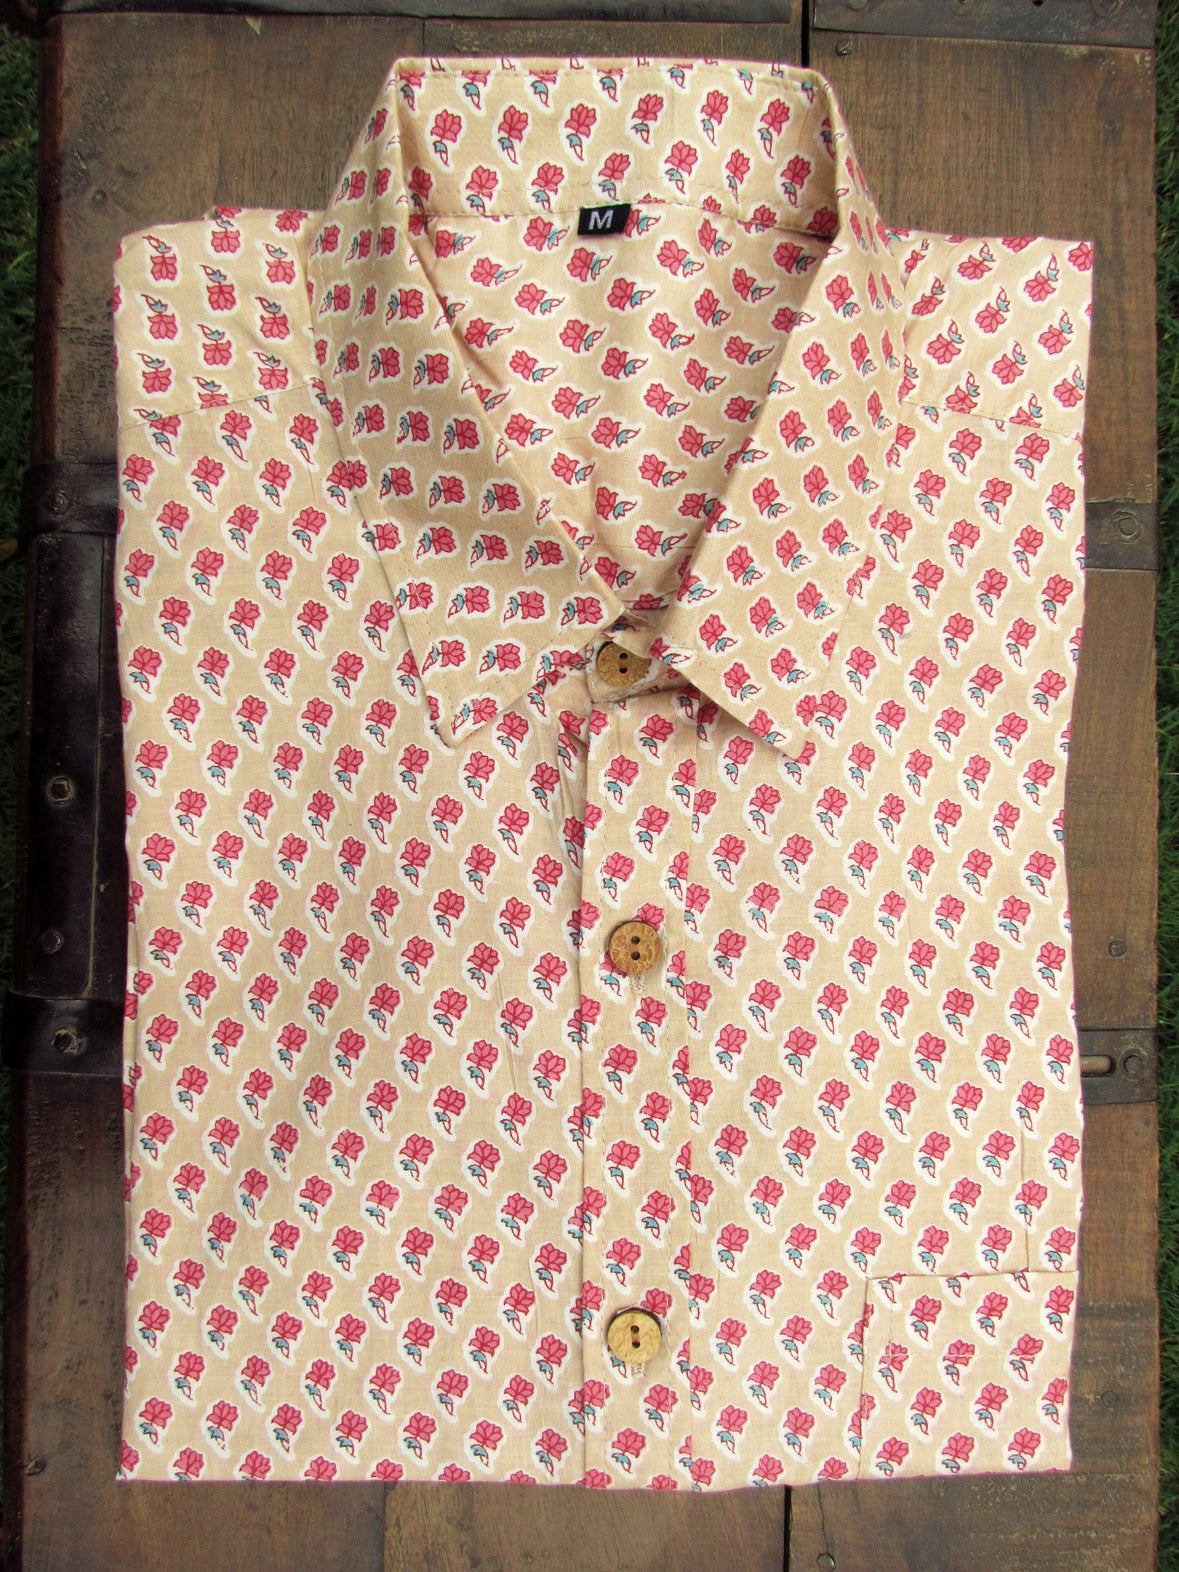 latest fashion designer pure cotton handblock shirts for men handmade in india online shopping floral pattern in peach and pink